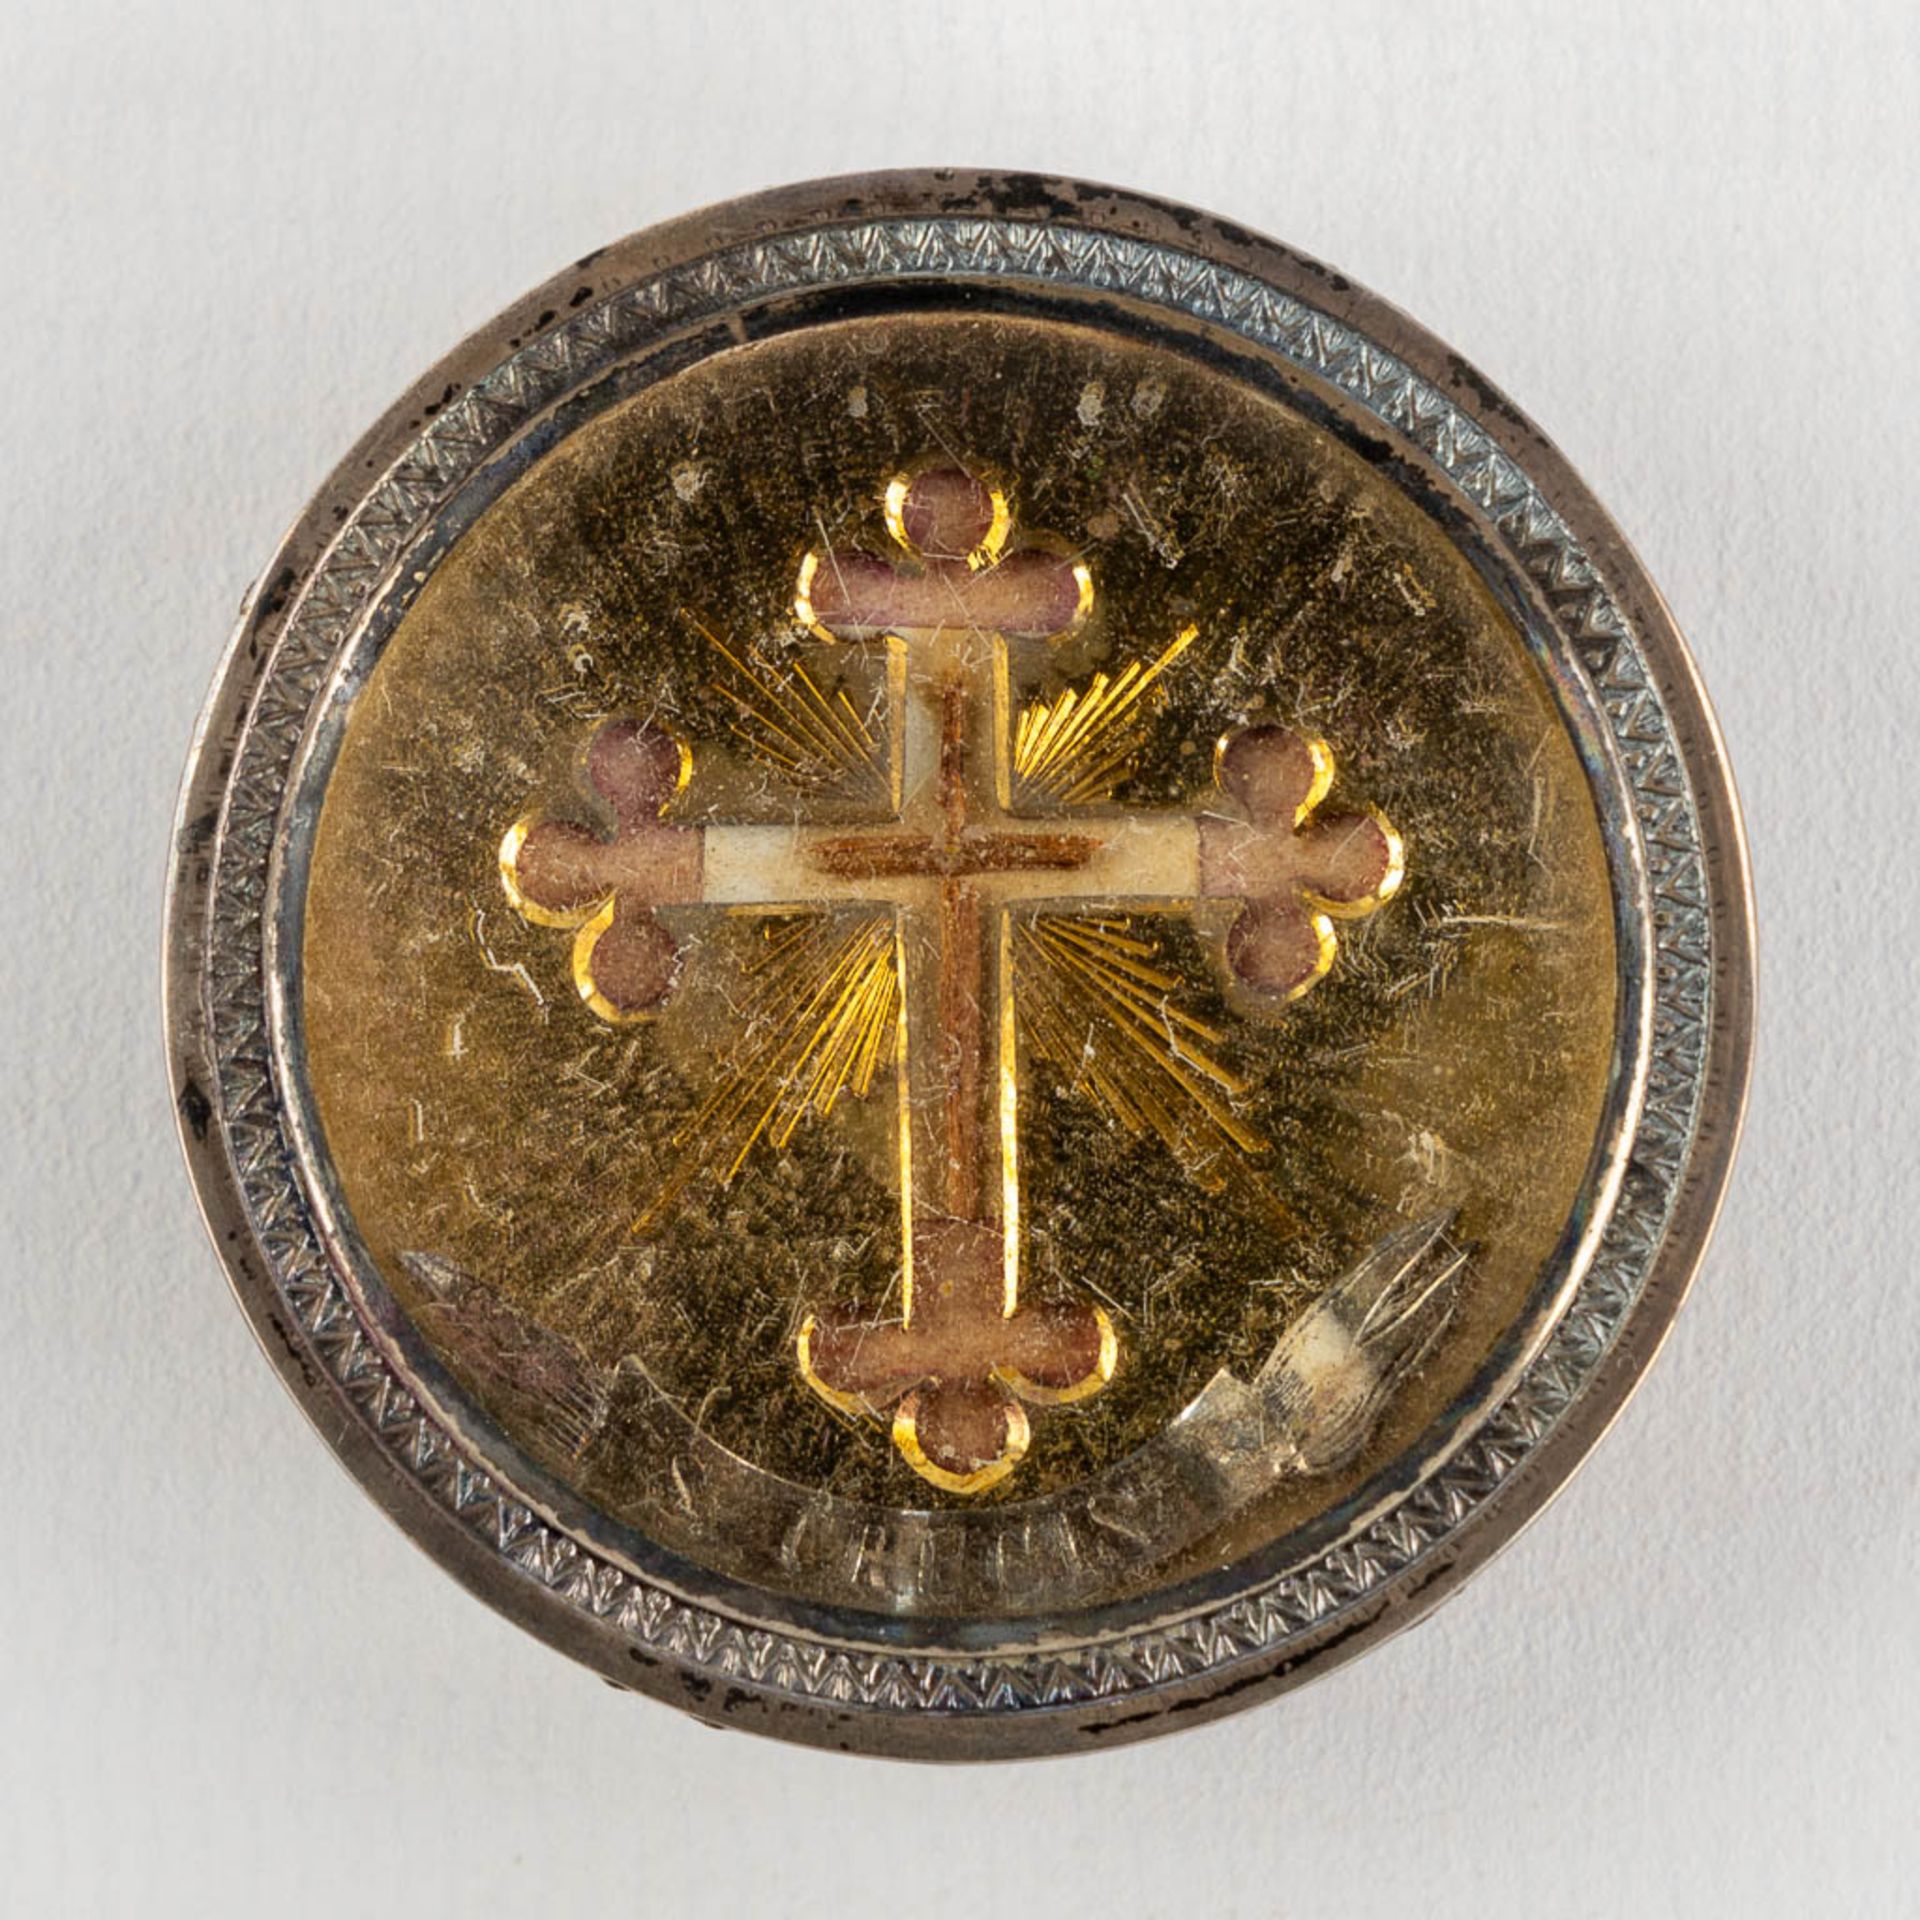 A sealed theca with relic of the True Cross. (D:4,4 cm)